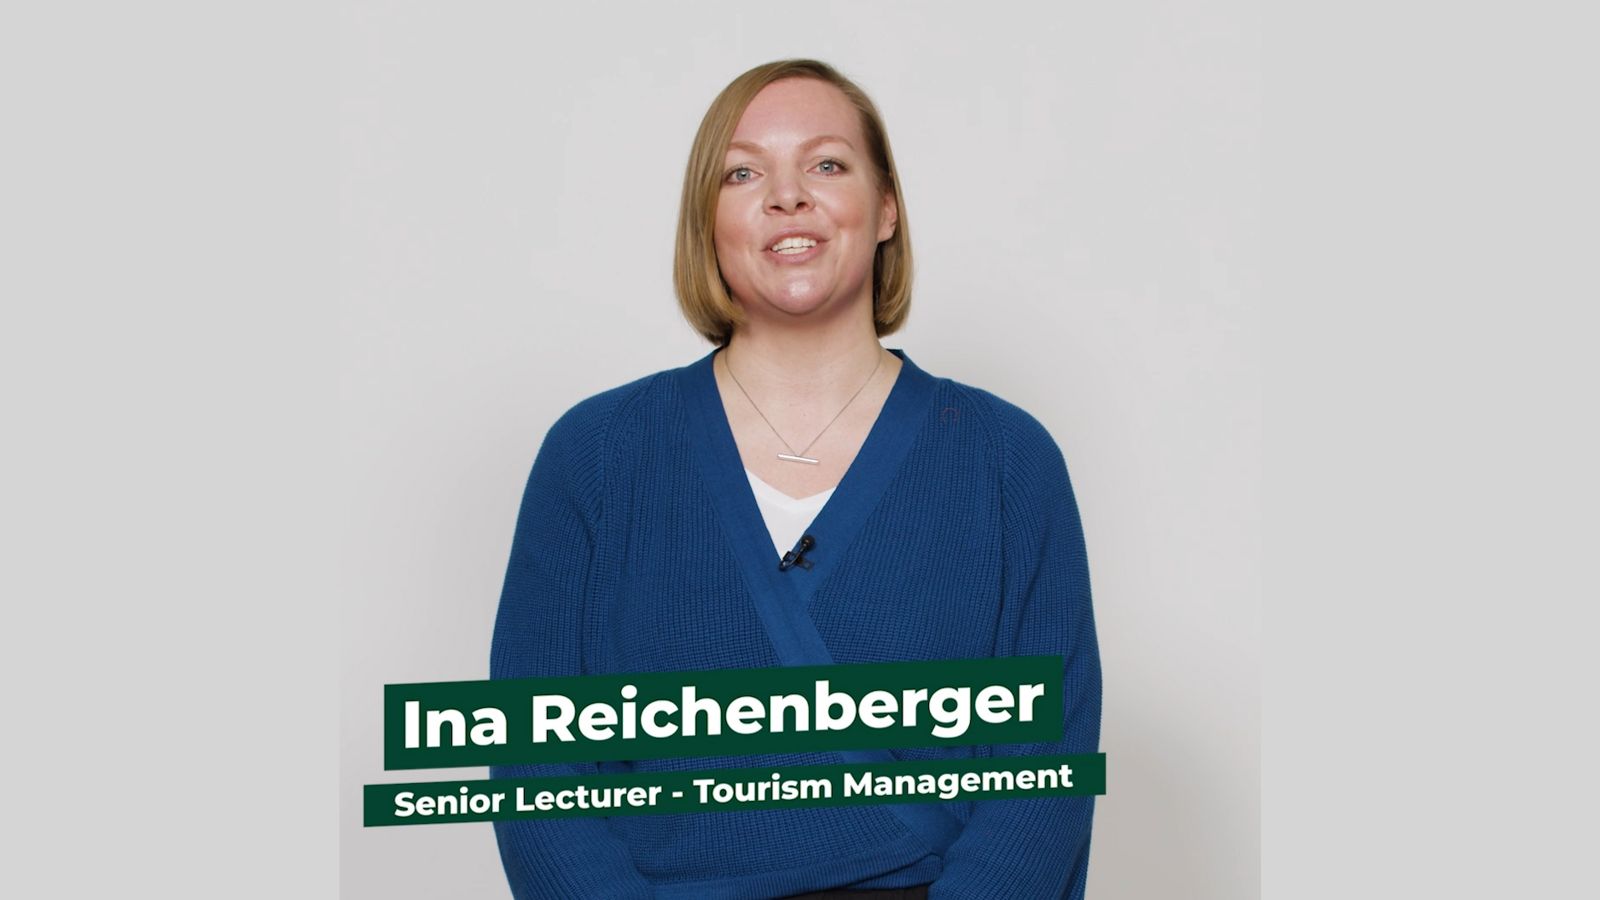 Senior Lecturer Ina Reichenberger stands facing the camera against a white background